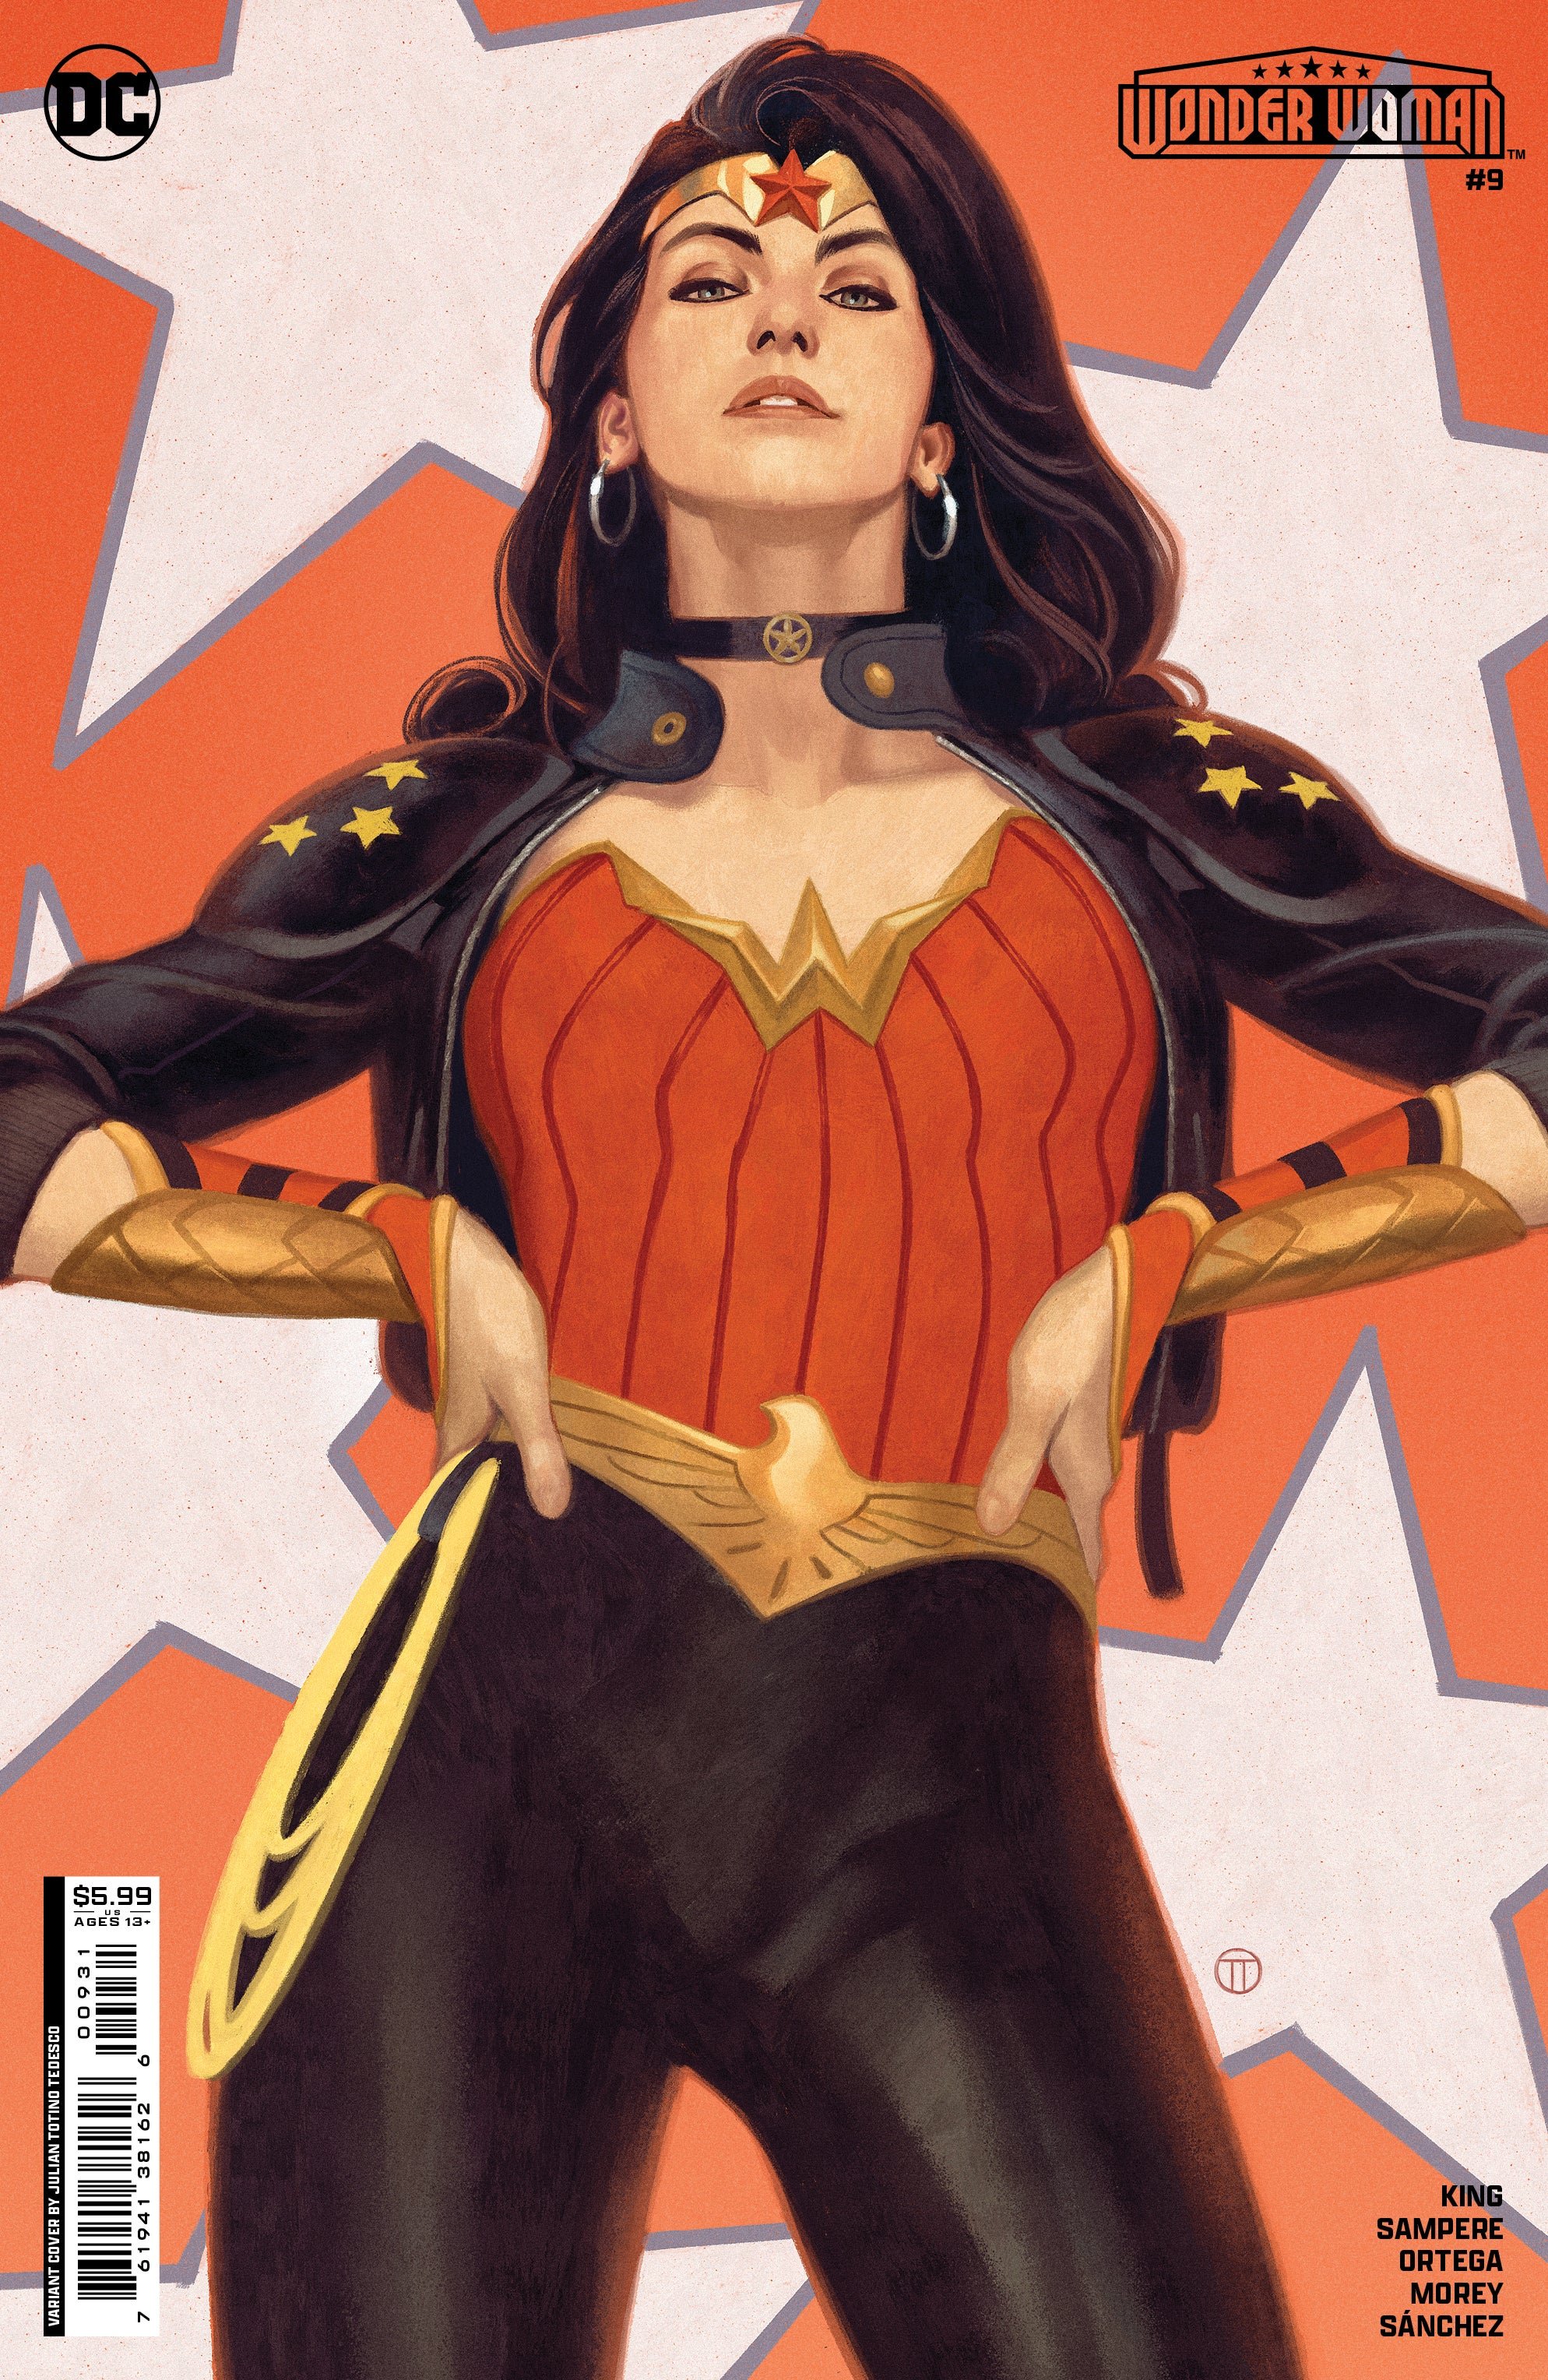 Julian Tedesco draws Wonder Woman in her leather jacket outfit